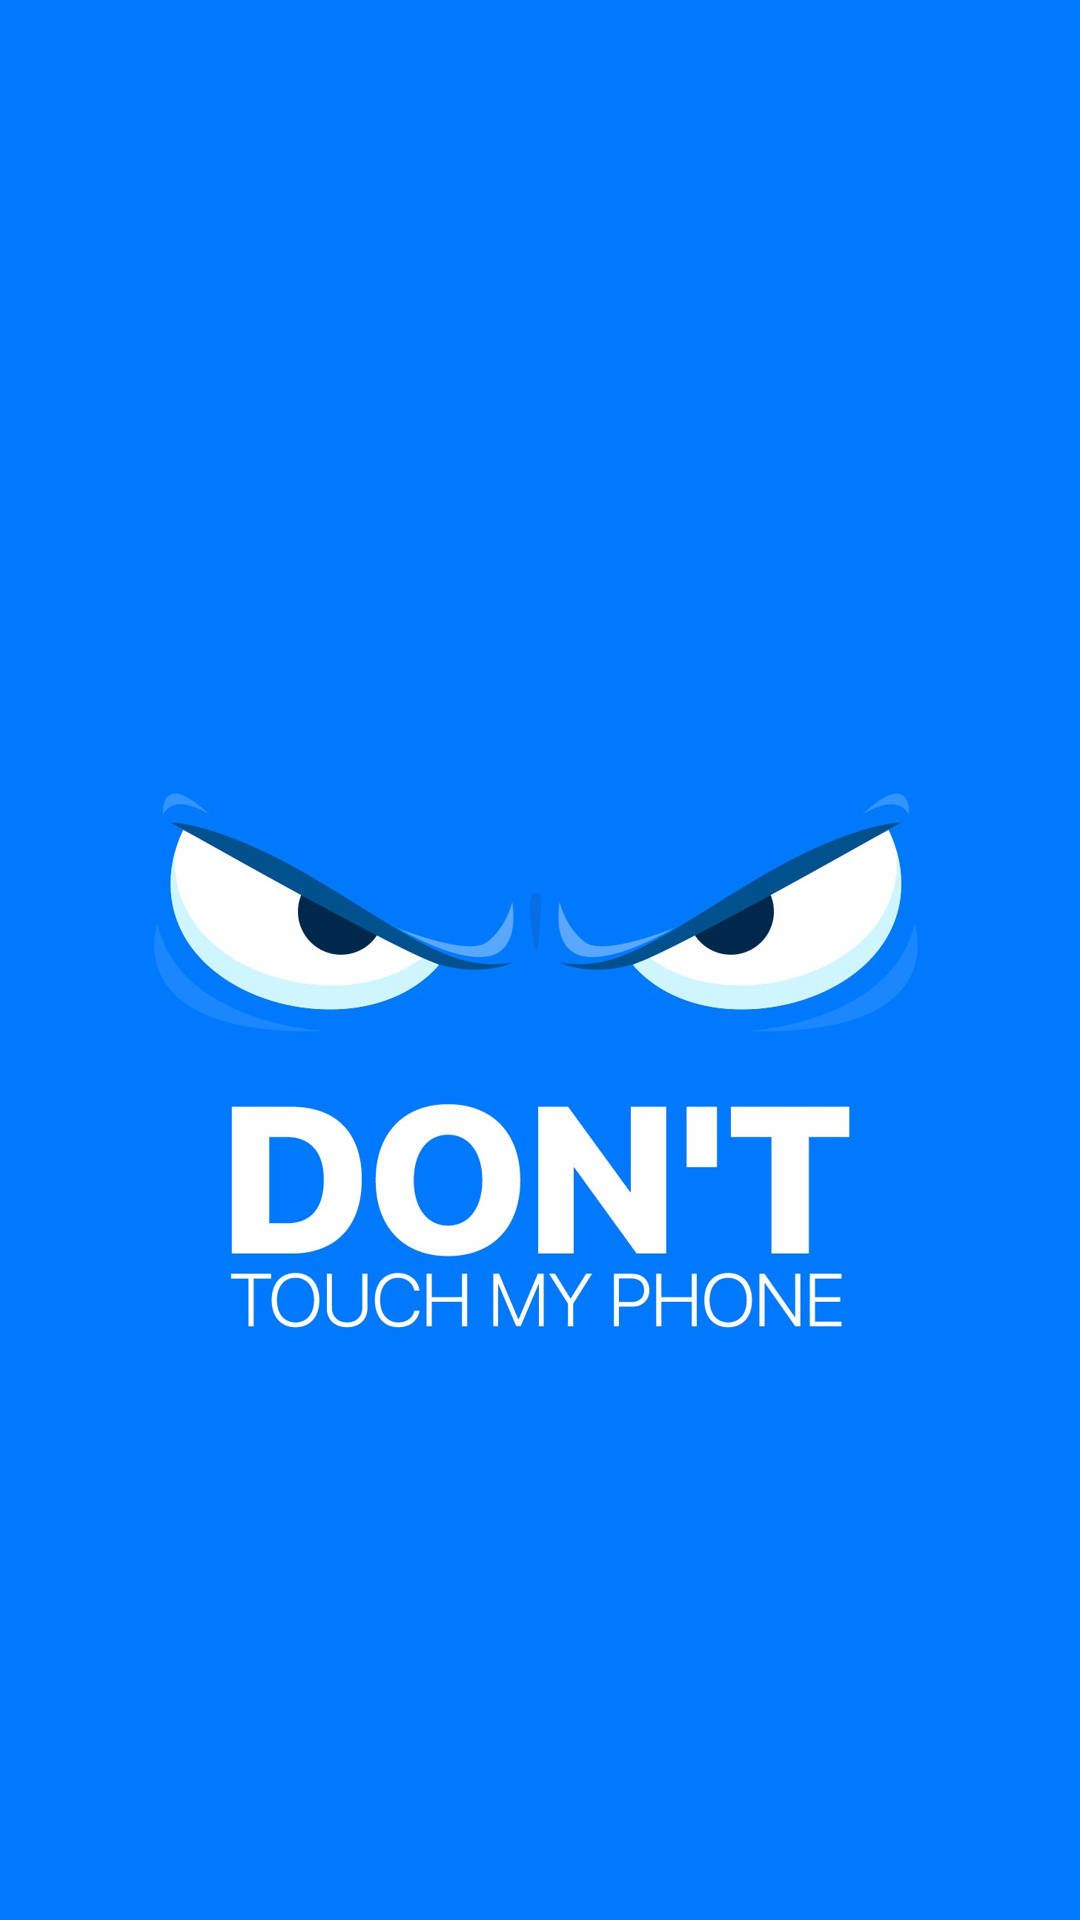 Dont touch my phone wallpaper blue eyes - Don't touch my phone